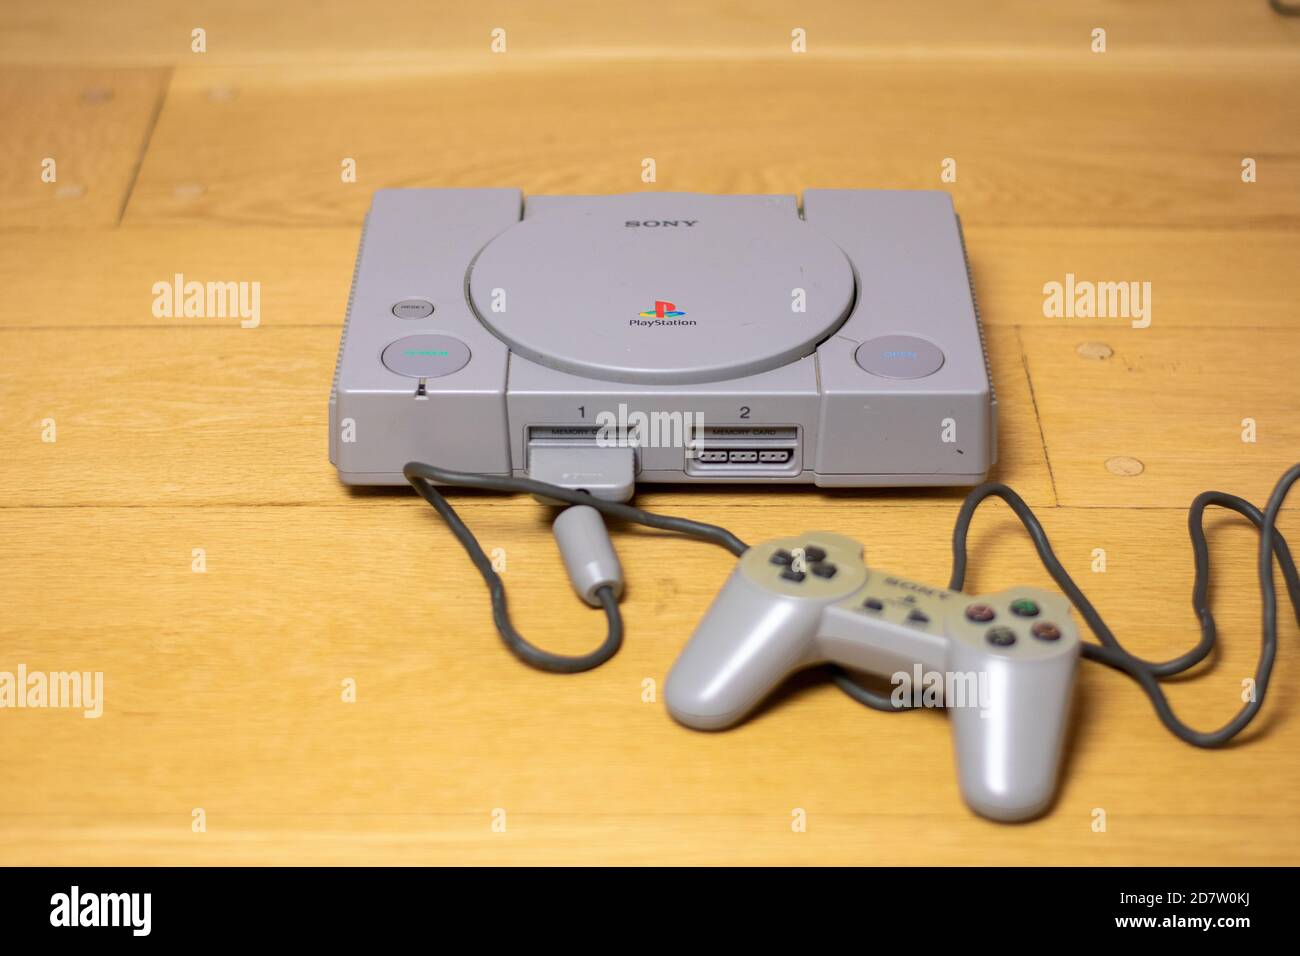 An Original Playstation 1, by Sony, on a wooden floor Stock Photo - Alamy